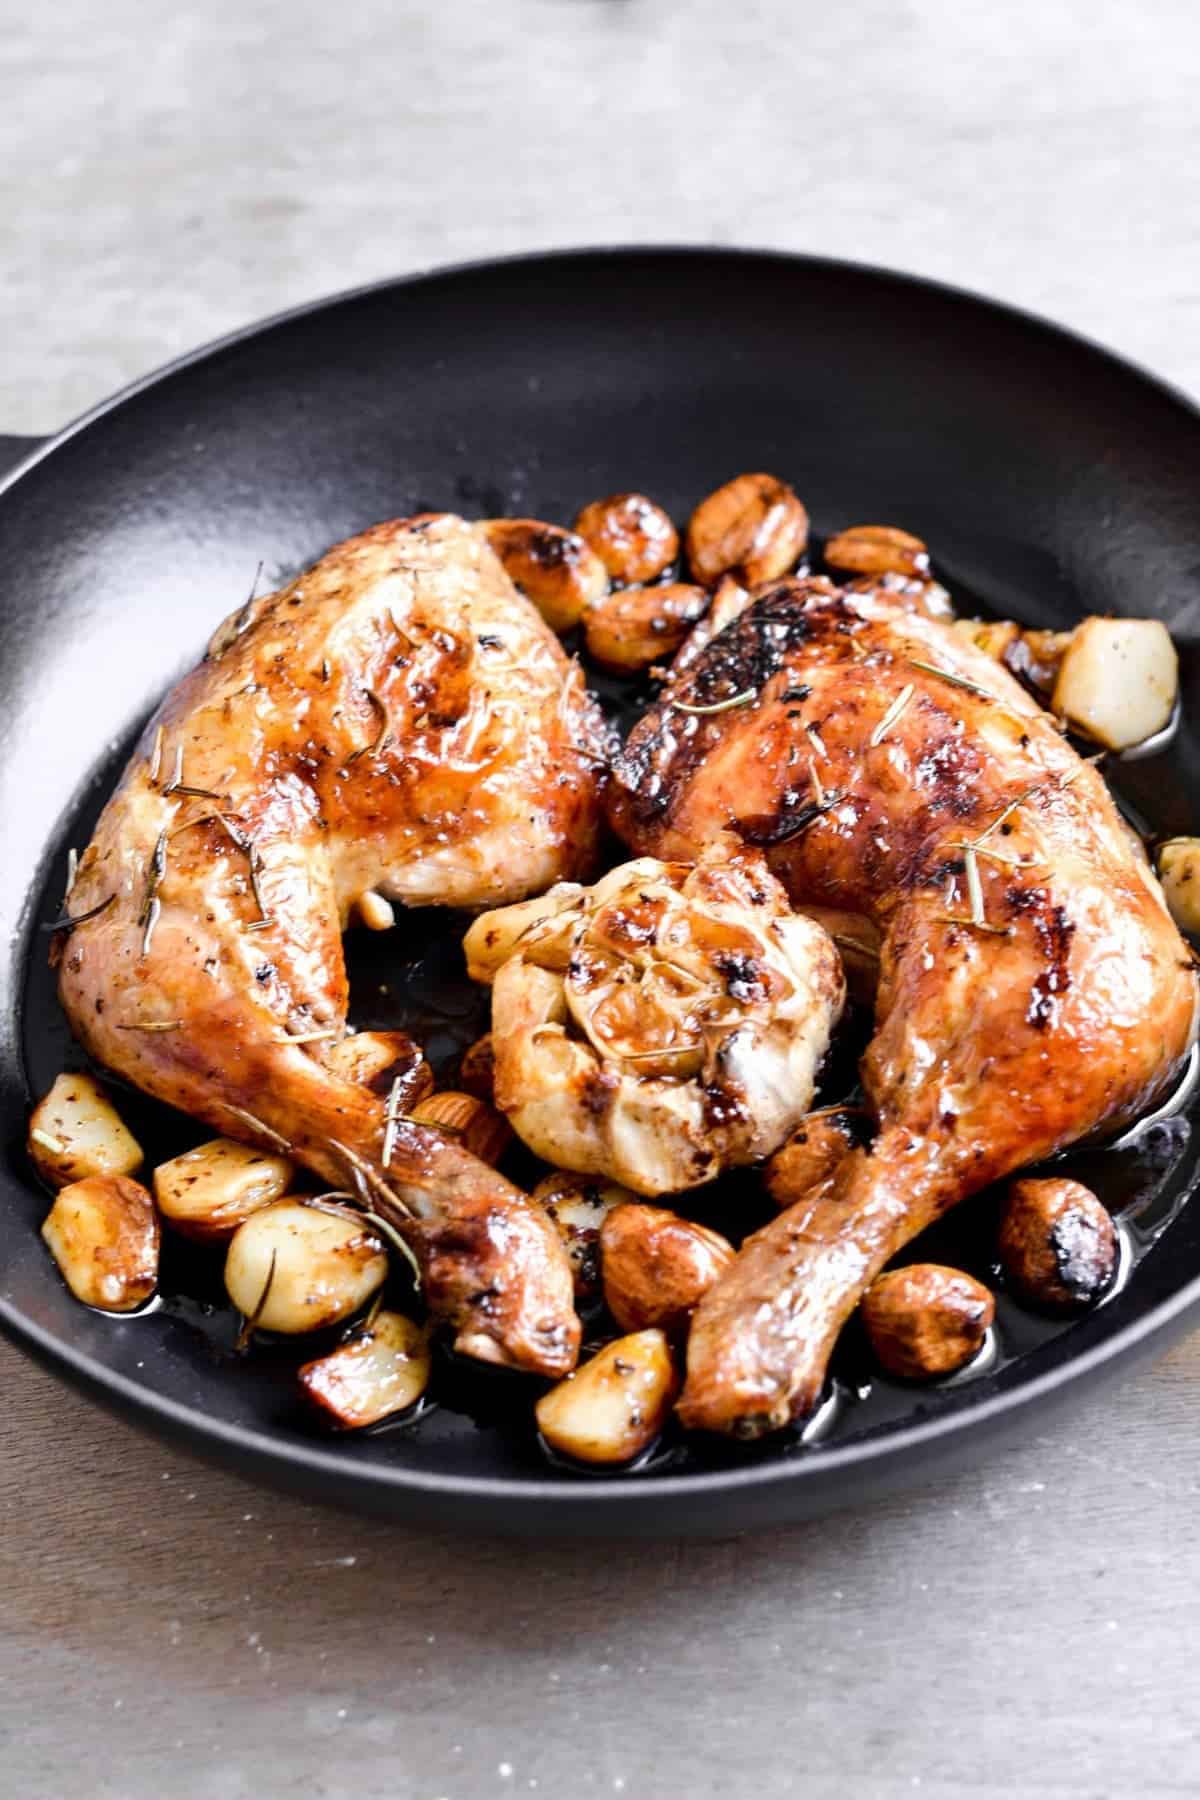 Chicken served with garlic cloves on a black plate